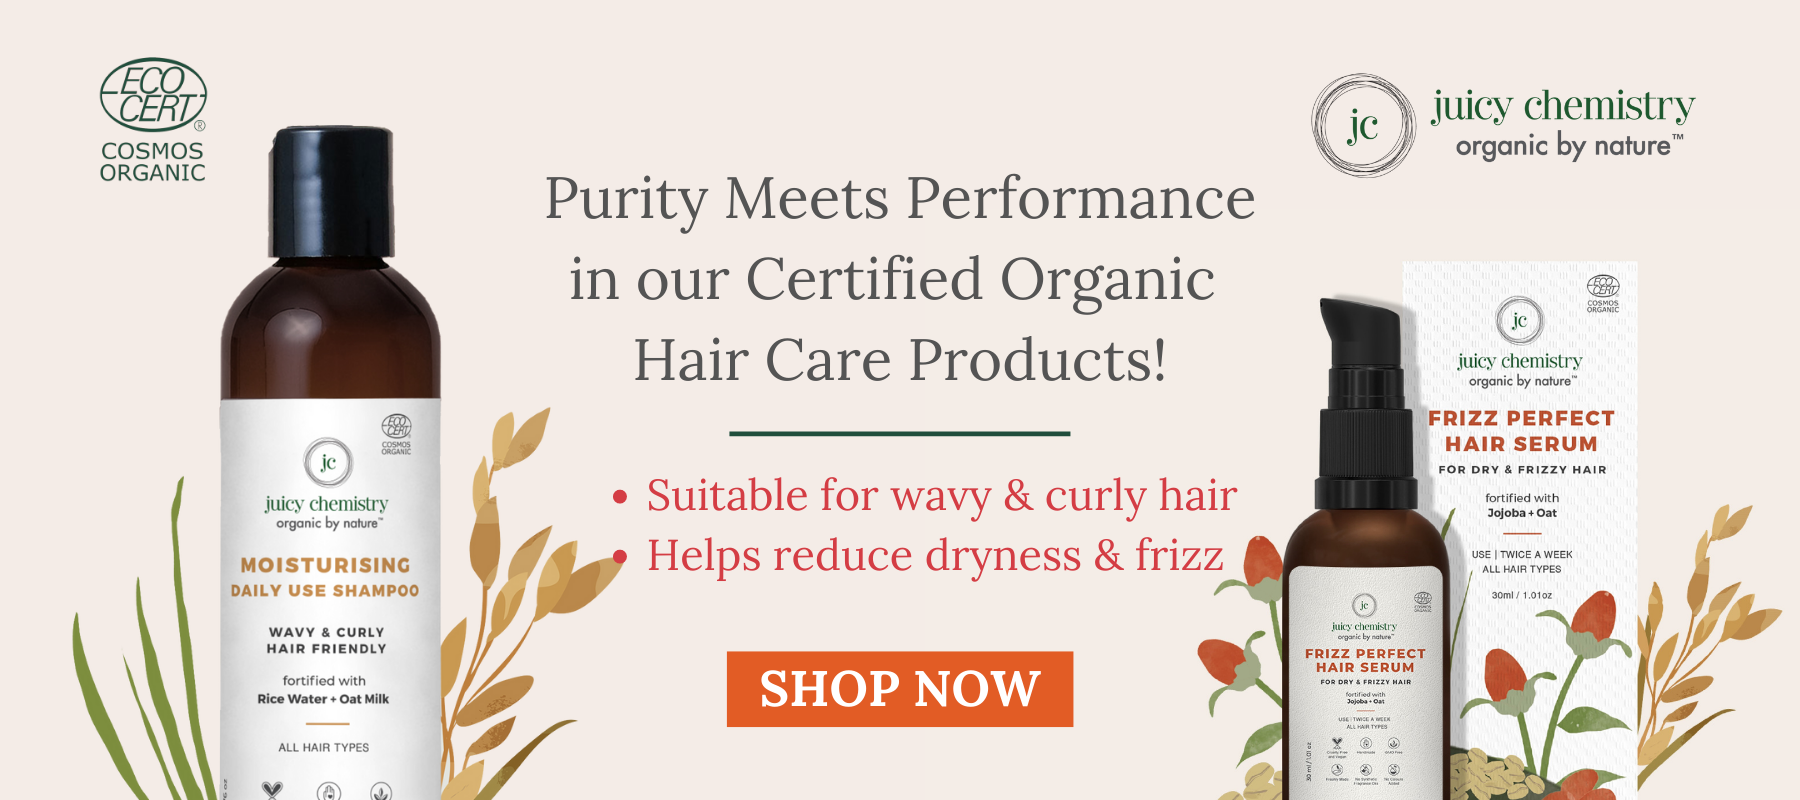 100% Organic & Natural Face, Skin, & Body Care Products -Juicy Chemistry